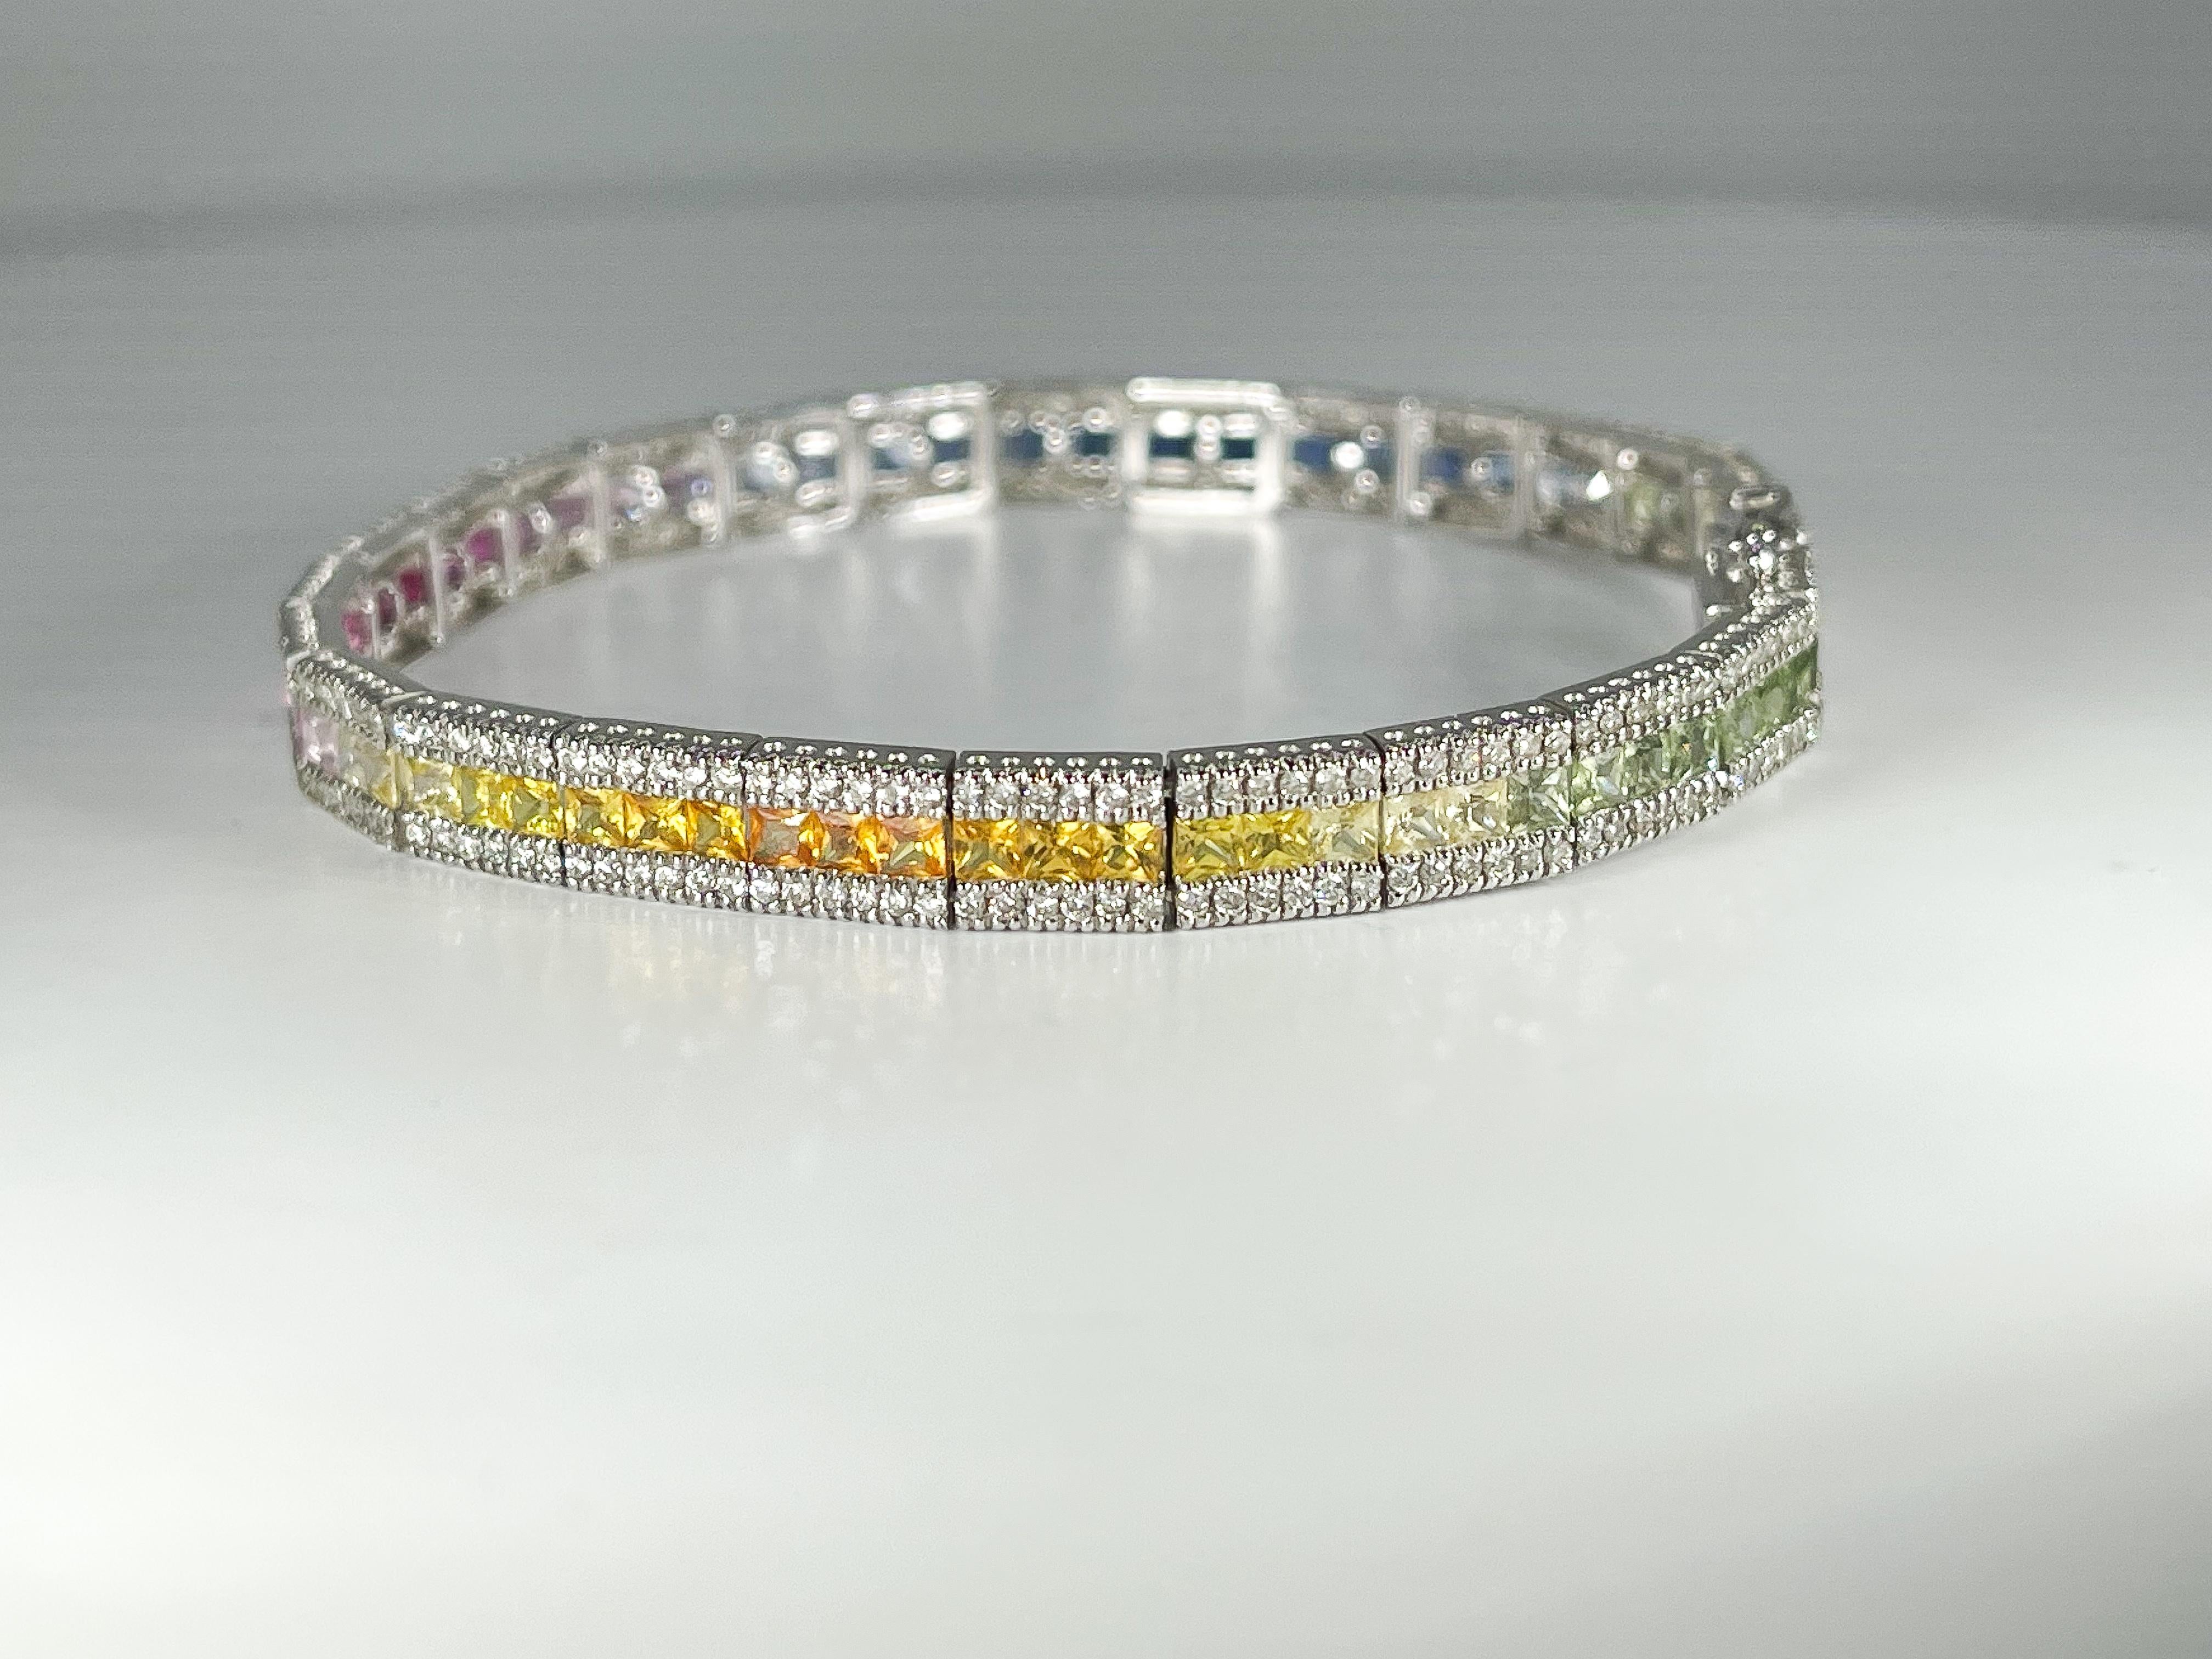 14k white gold fashion bracelet with colored princess cut sapphires and round diamonds. The sapphires are placed in a gradient fashion to show each color spectrum of the rainbow and the diamonds are placed alongside the sapphires for an enhanced